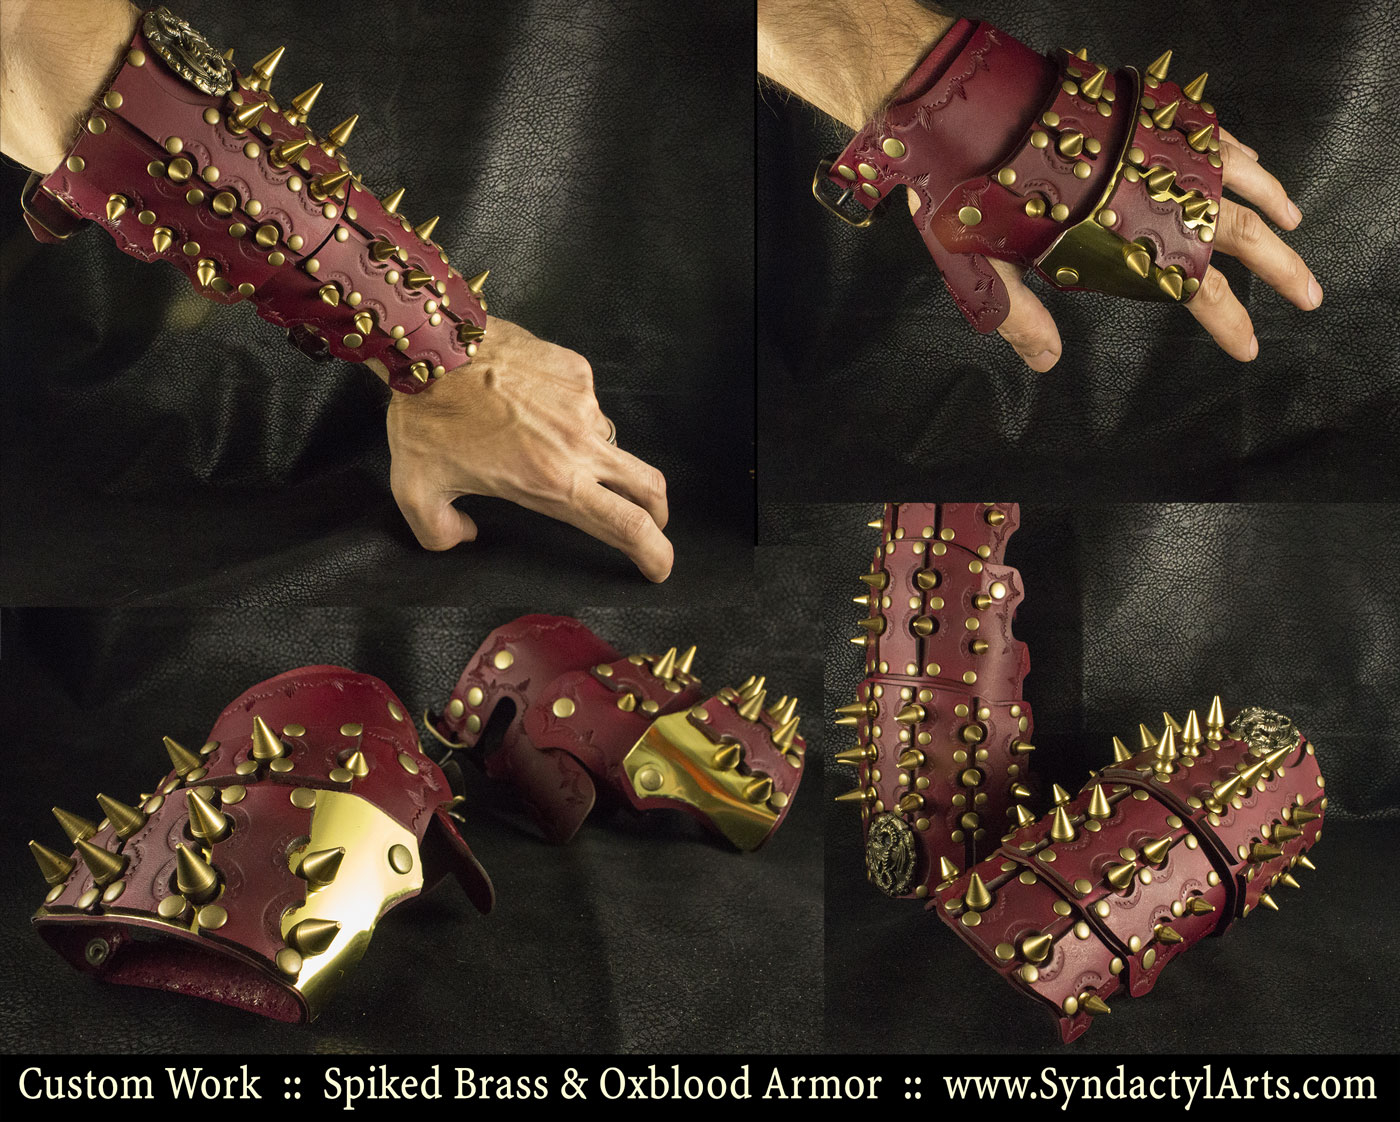 Spiked Brass and Oxblood Armor by ChaoseVIIn on DeviantArt